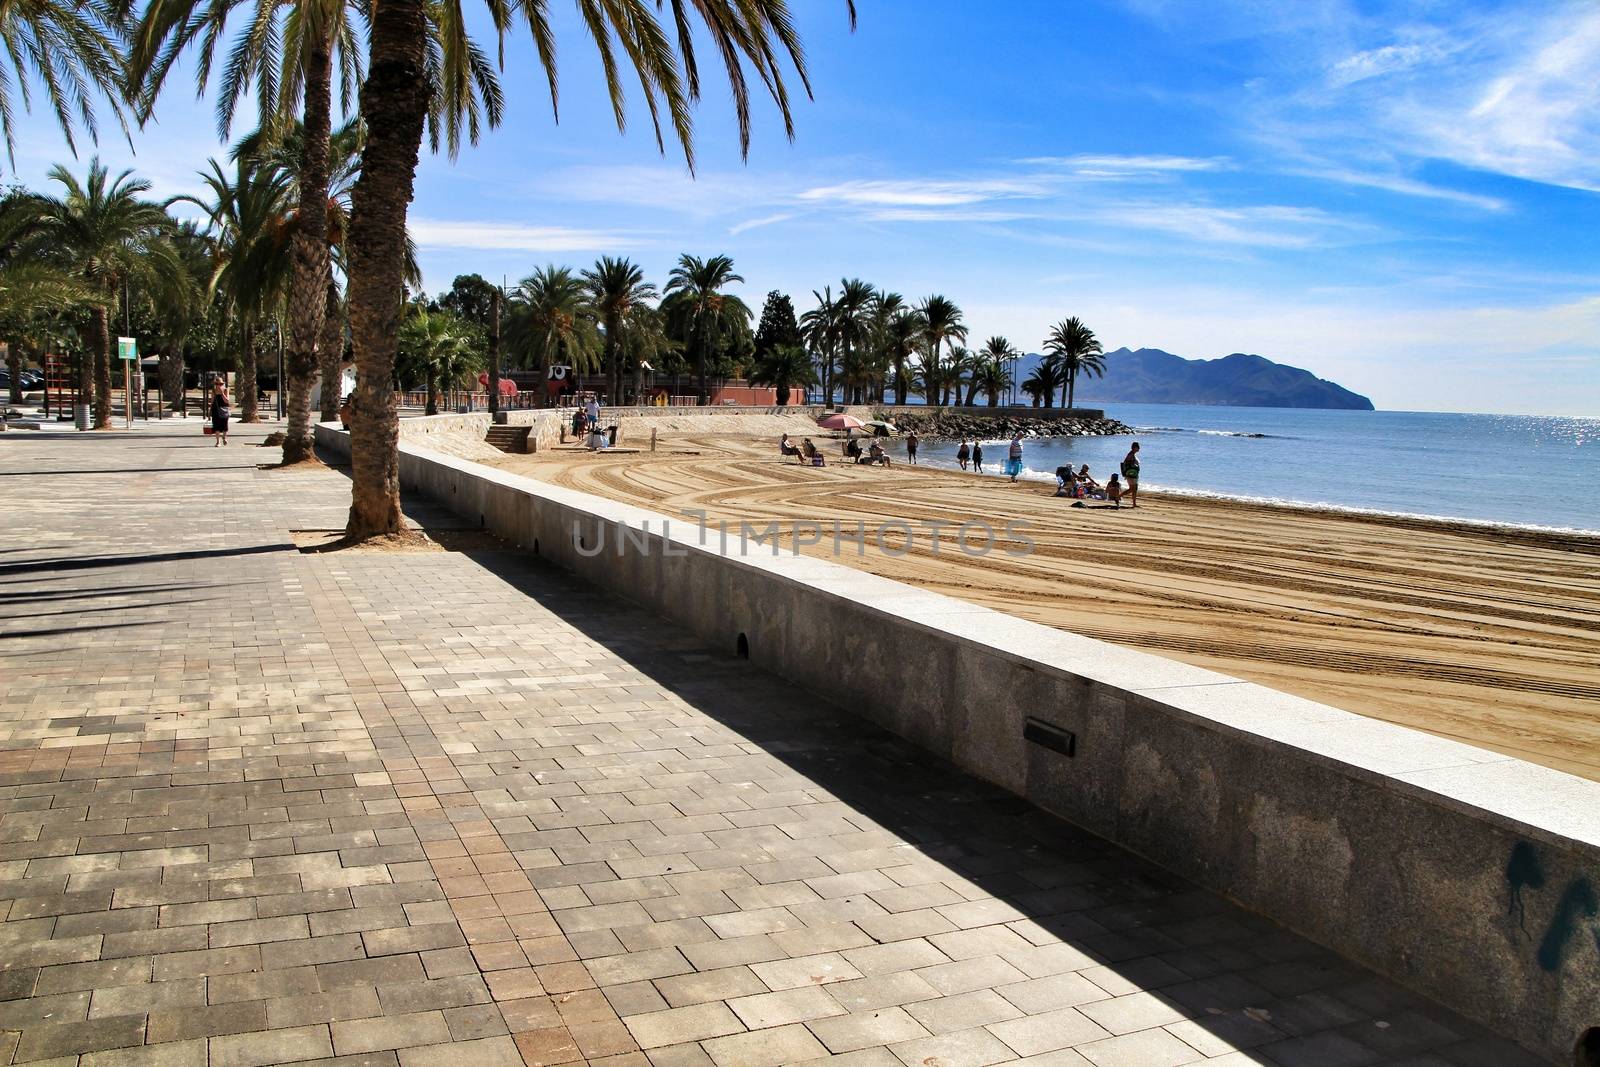 Mazarron, Murcia, Spain- October 3, 2019: Beautiful beach view from the promenade in a sunny and clear day in Mazarron, Murcia, Spain. People relaxing and sunbathing on the beach.